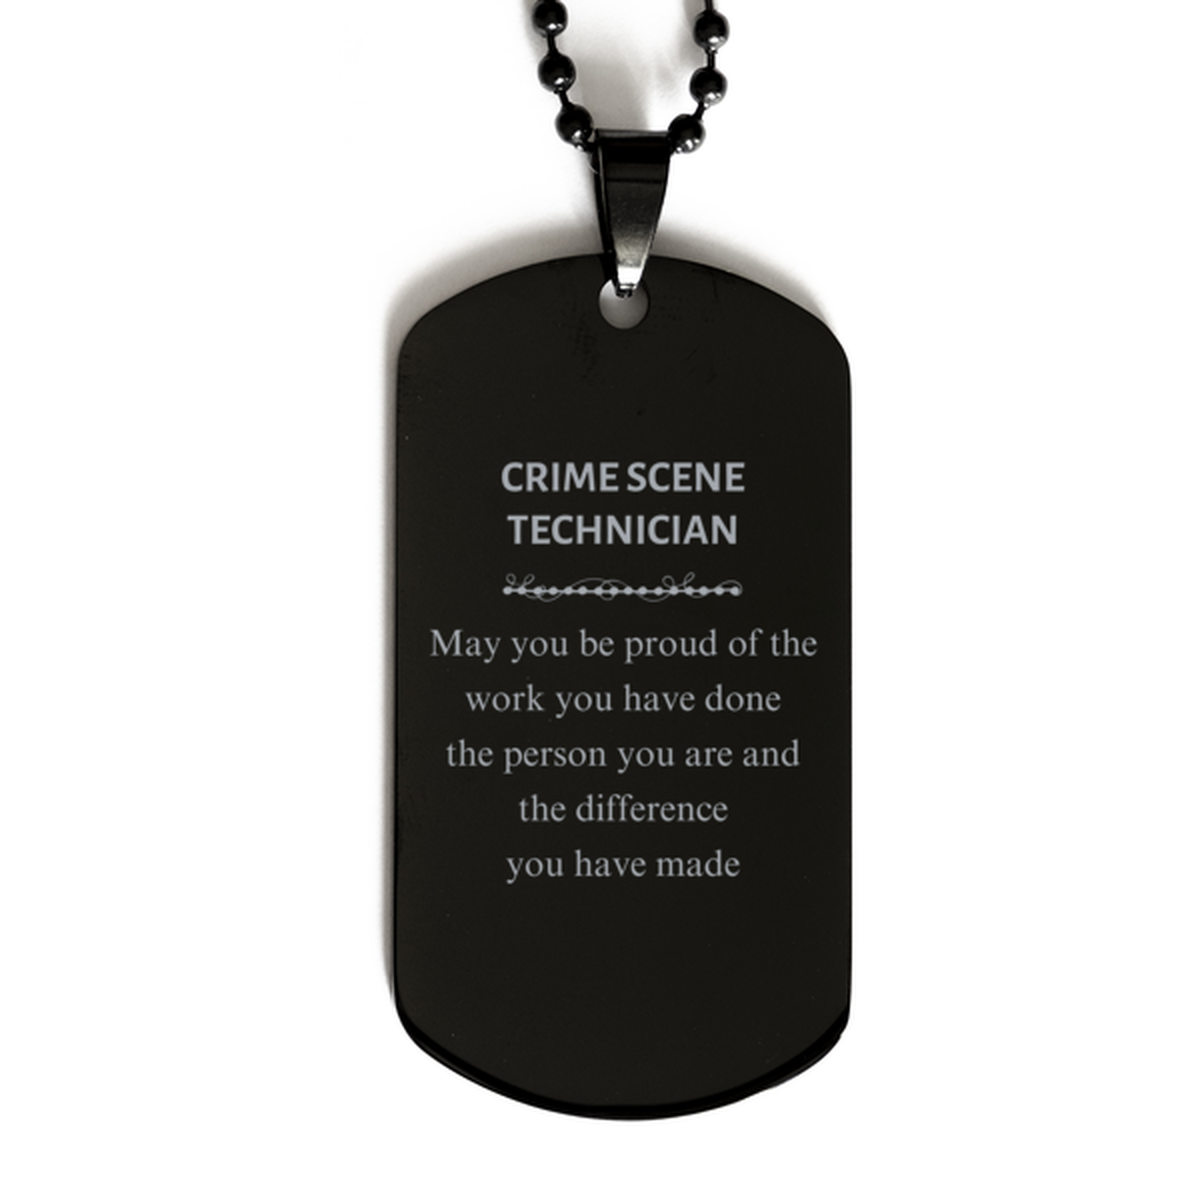 Crime Scene Technician May you be proud of the work you have done, Retirement Crime Scene Technician Black Dog Tag for Colleague Appreciation Gifts Amazing for Crime Scene Technician